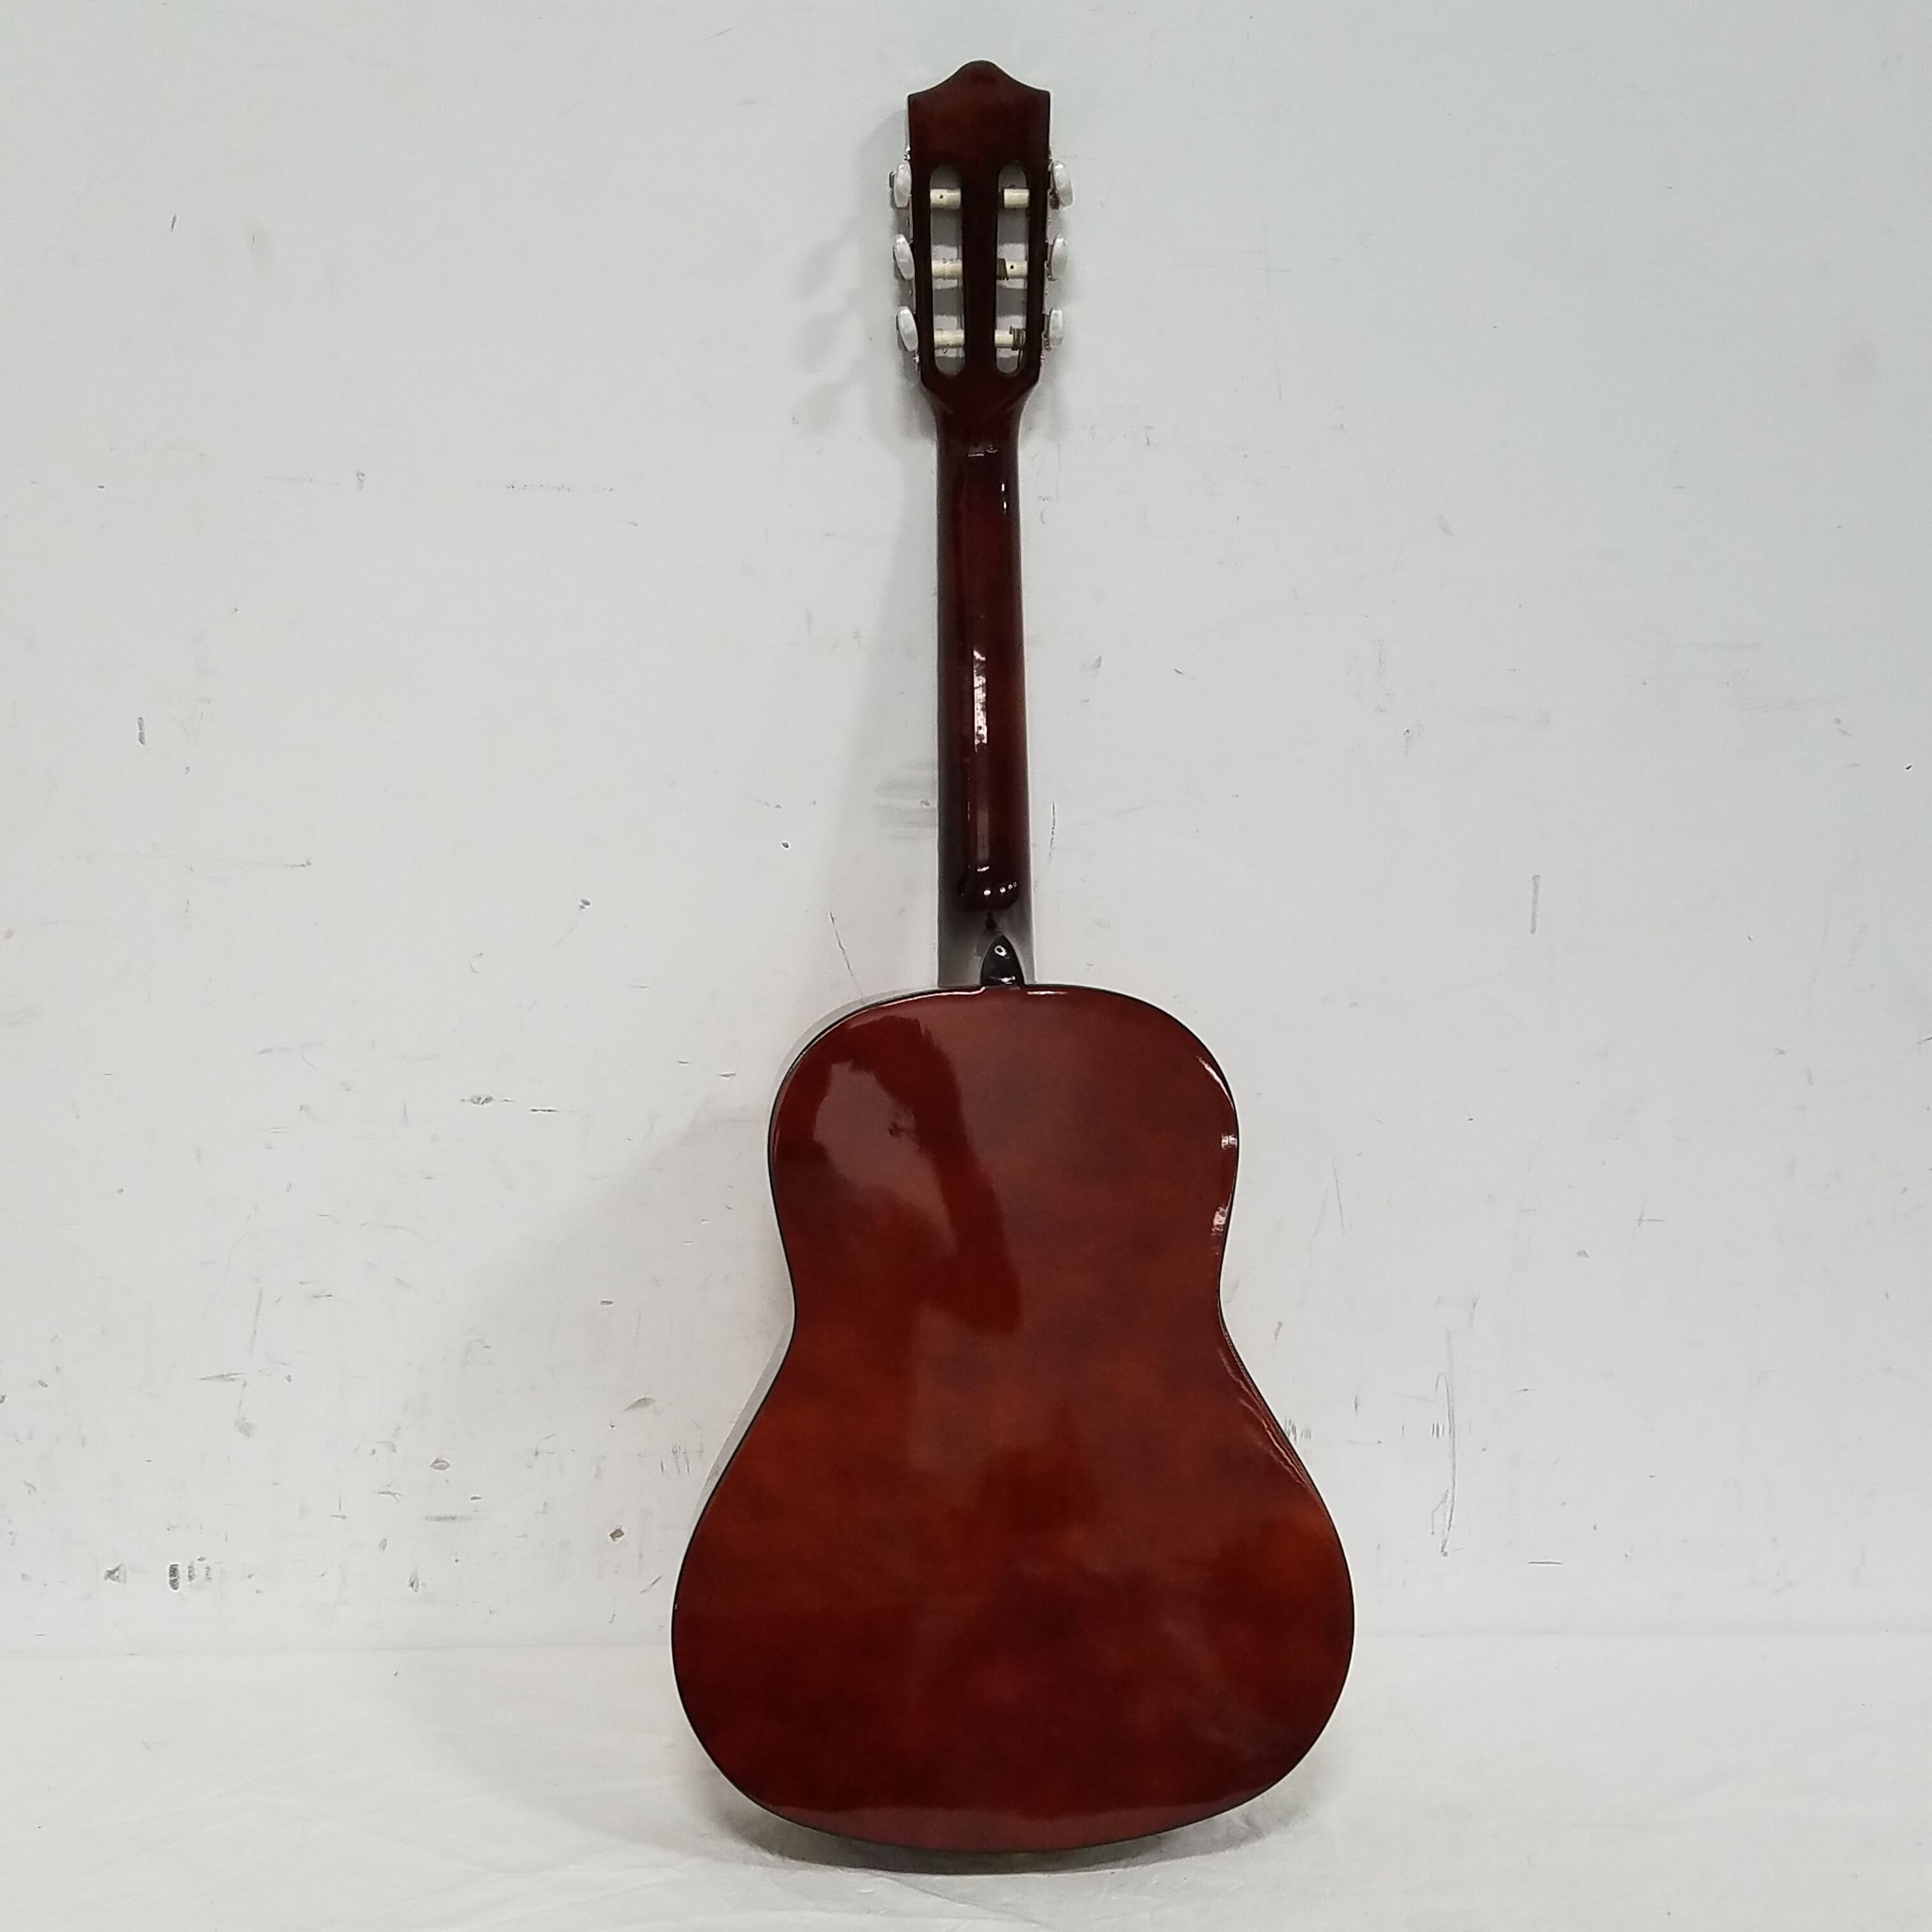 Buy the Acoustic Guitar - Strong Wind 6 String 3/4 Classic ...